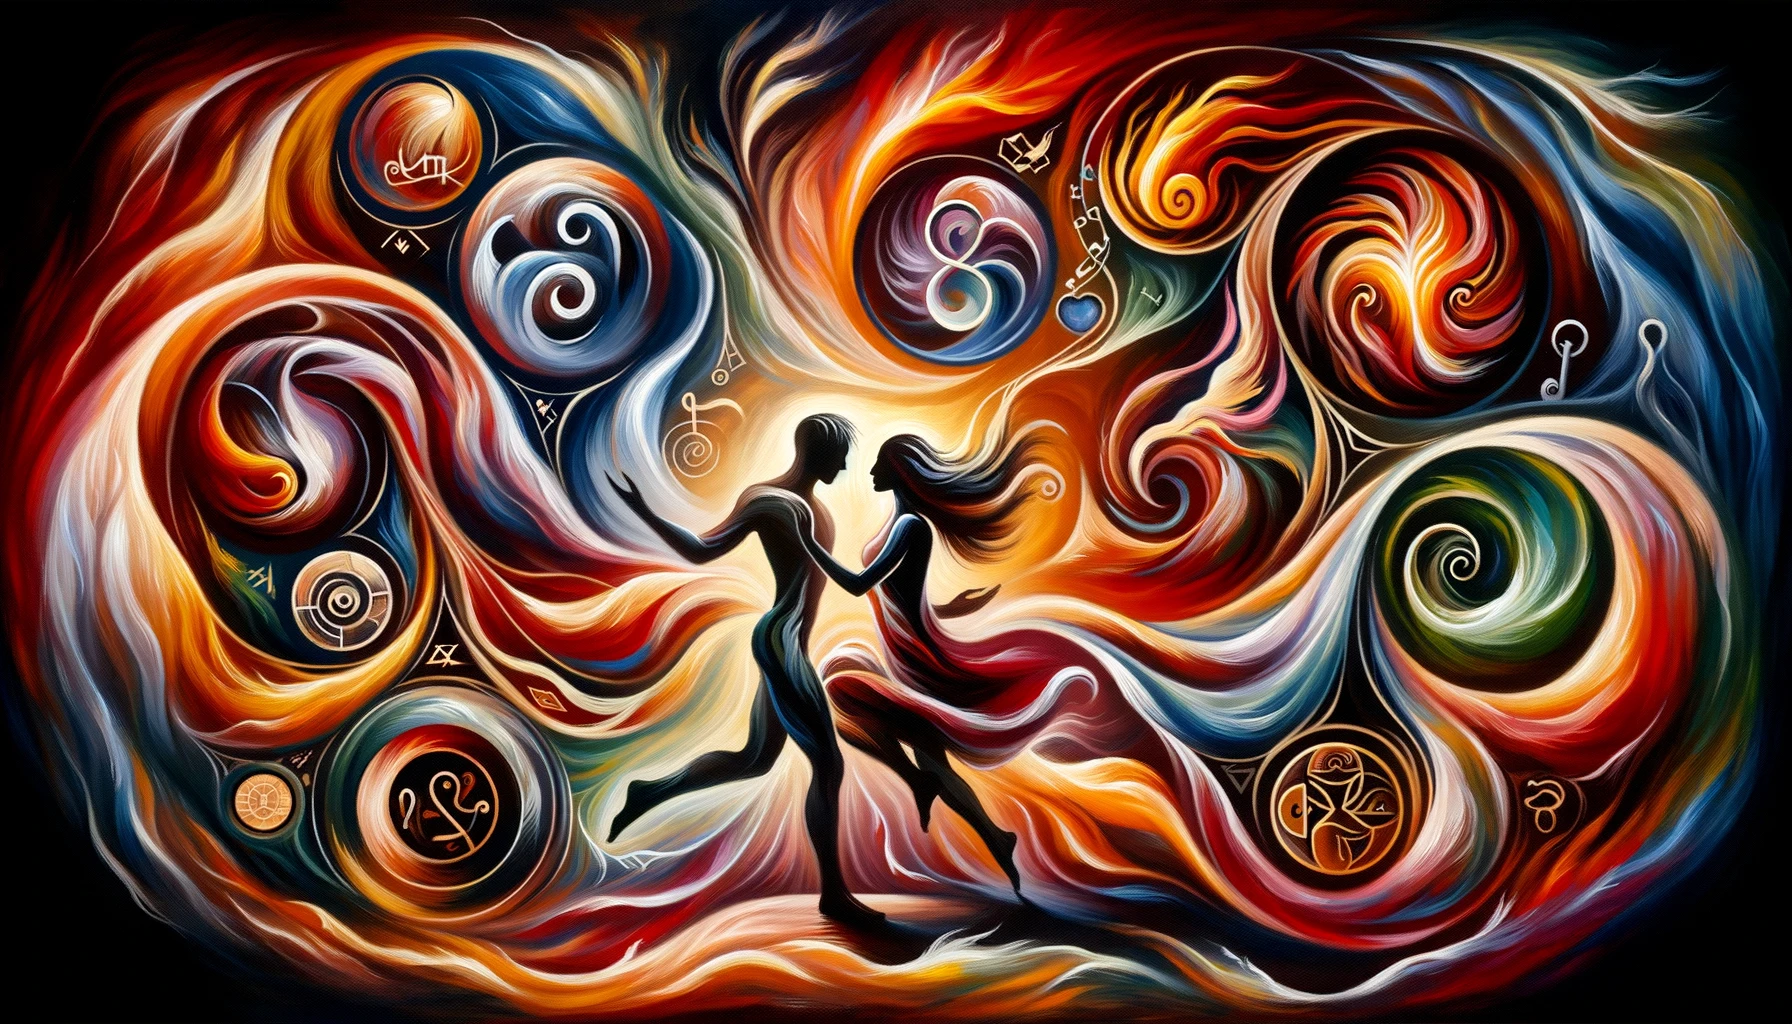 Generated by DALL-E with the prompt: An abstract painting depicting a man and a woman engaged in a metaphorical dance, symbolizing the uncertain future of their relationship. The couple is in the center, drawn with fluid, graceful lines that suggest movement and emotion. Around them, an abstract background swirls with symbolic representations of various forces: intertwining ribbons for mindsoul-connection, cultural motifs for tradition, fiery reds and oranges for eros and passion, lush greens for fertility, golds and silvers for money, and familial symbols. The color palette is rich and vibrant, capturing the complexity of their potential future together.